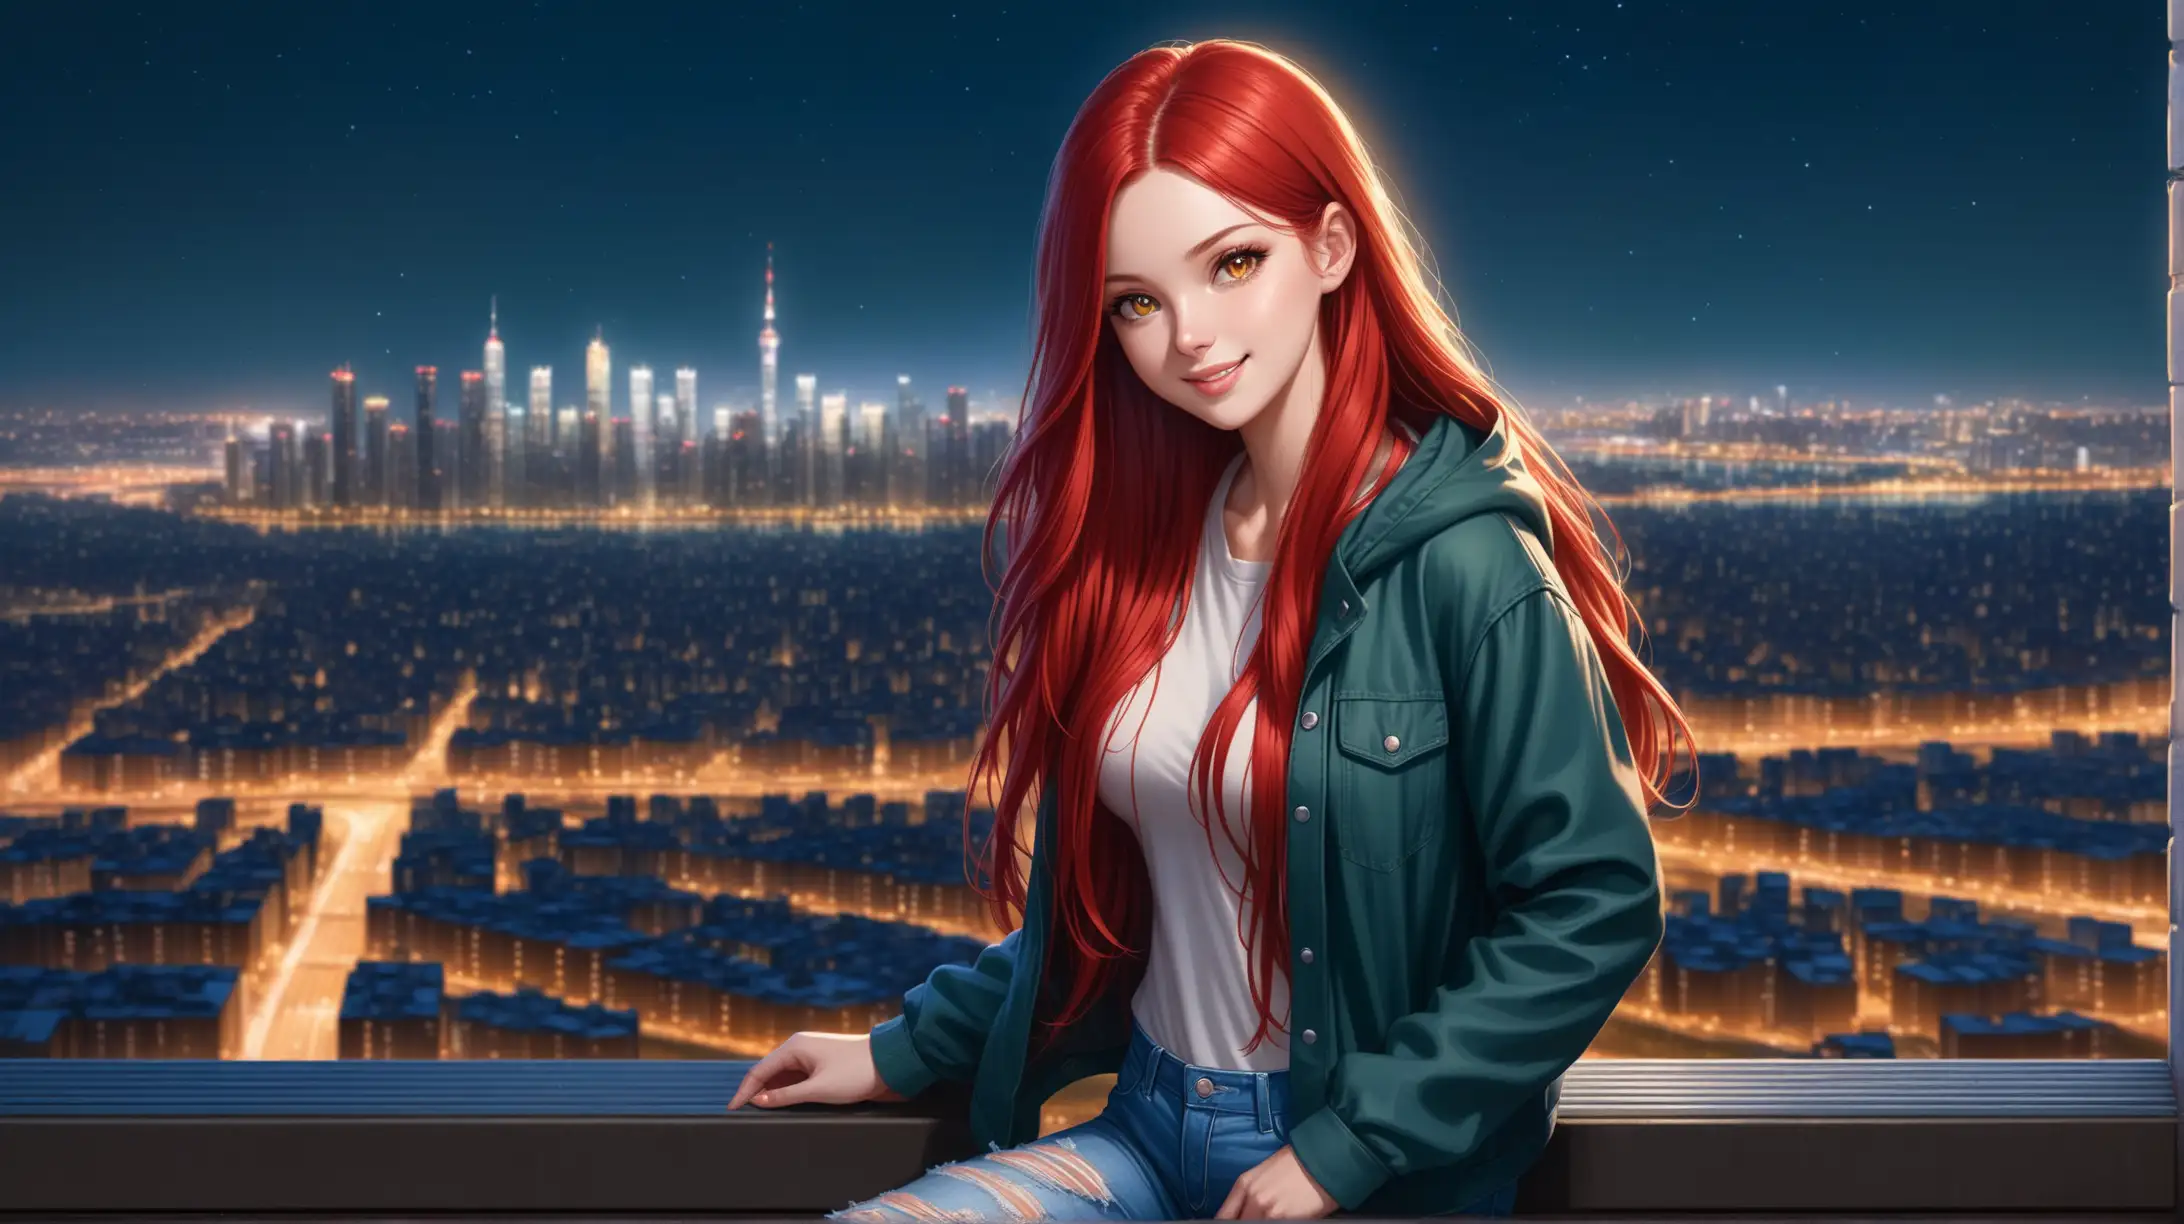 Smiling Woman with Long Red Hair in Urban Night Setting